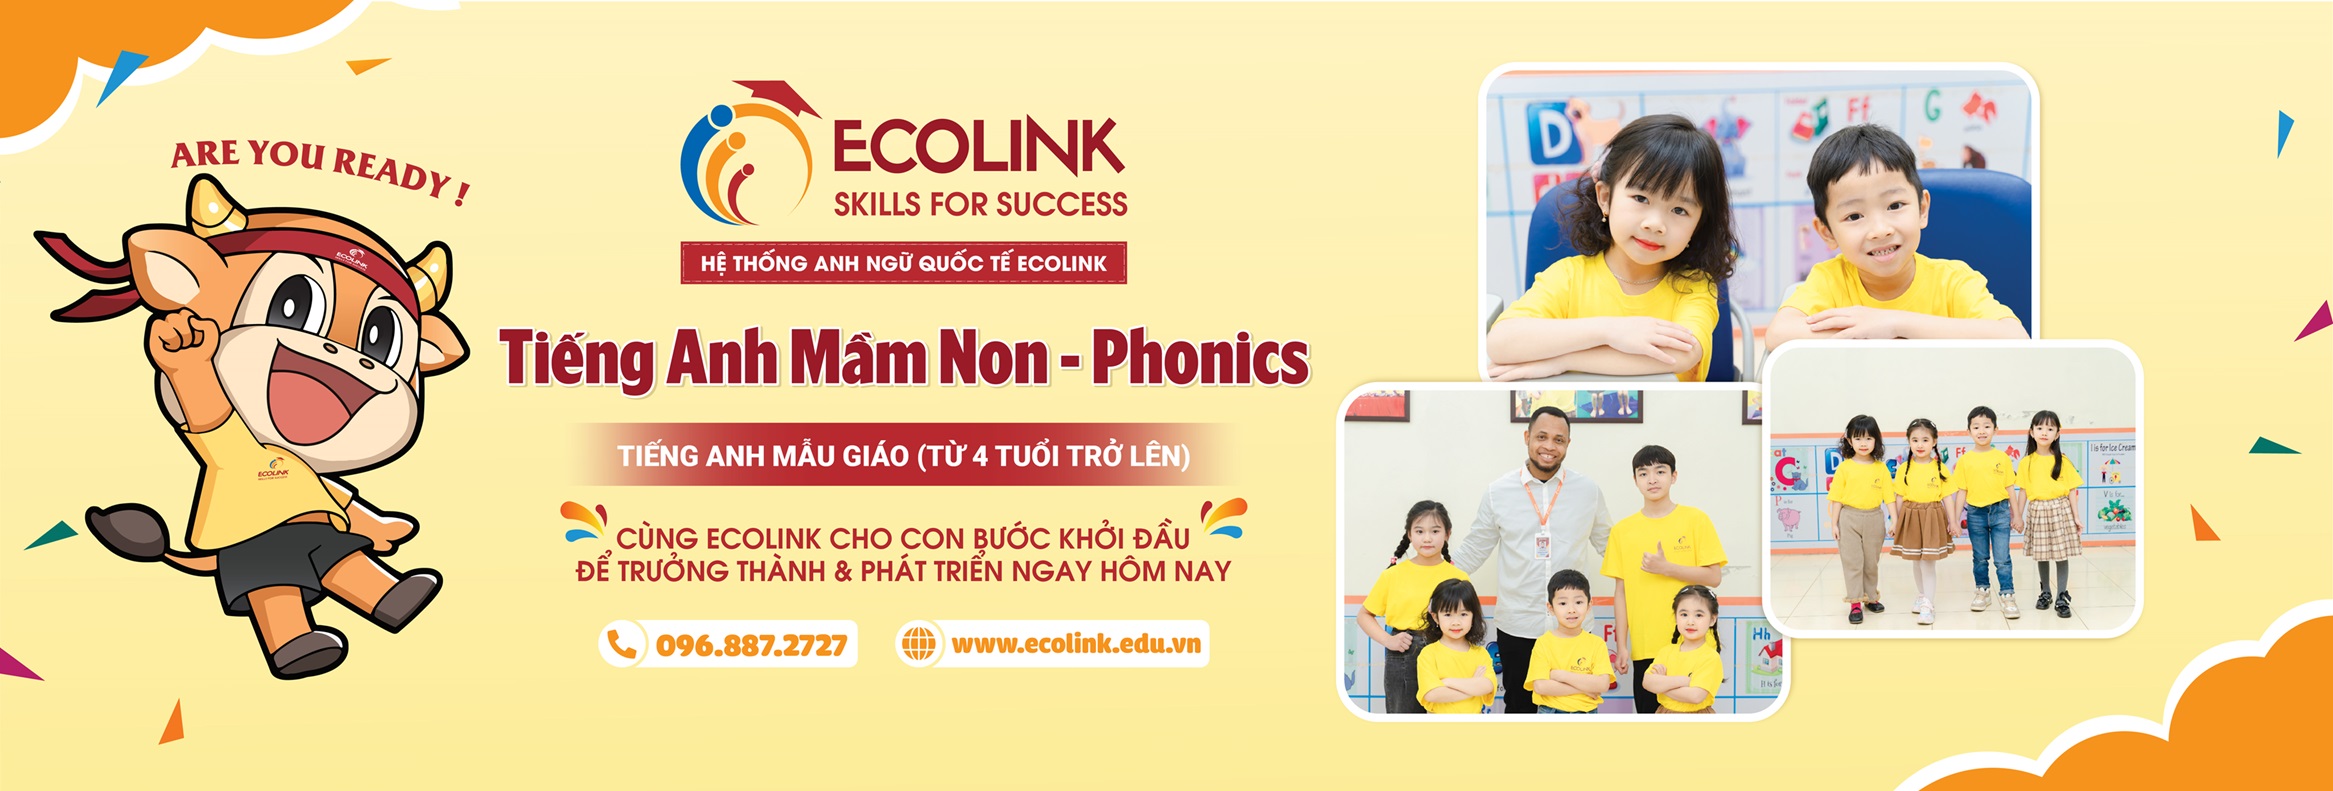 ecolink-tieng-anh-mam-non-1